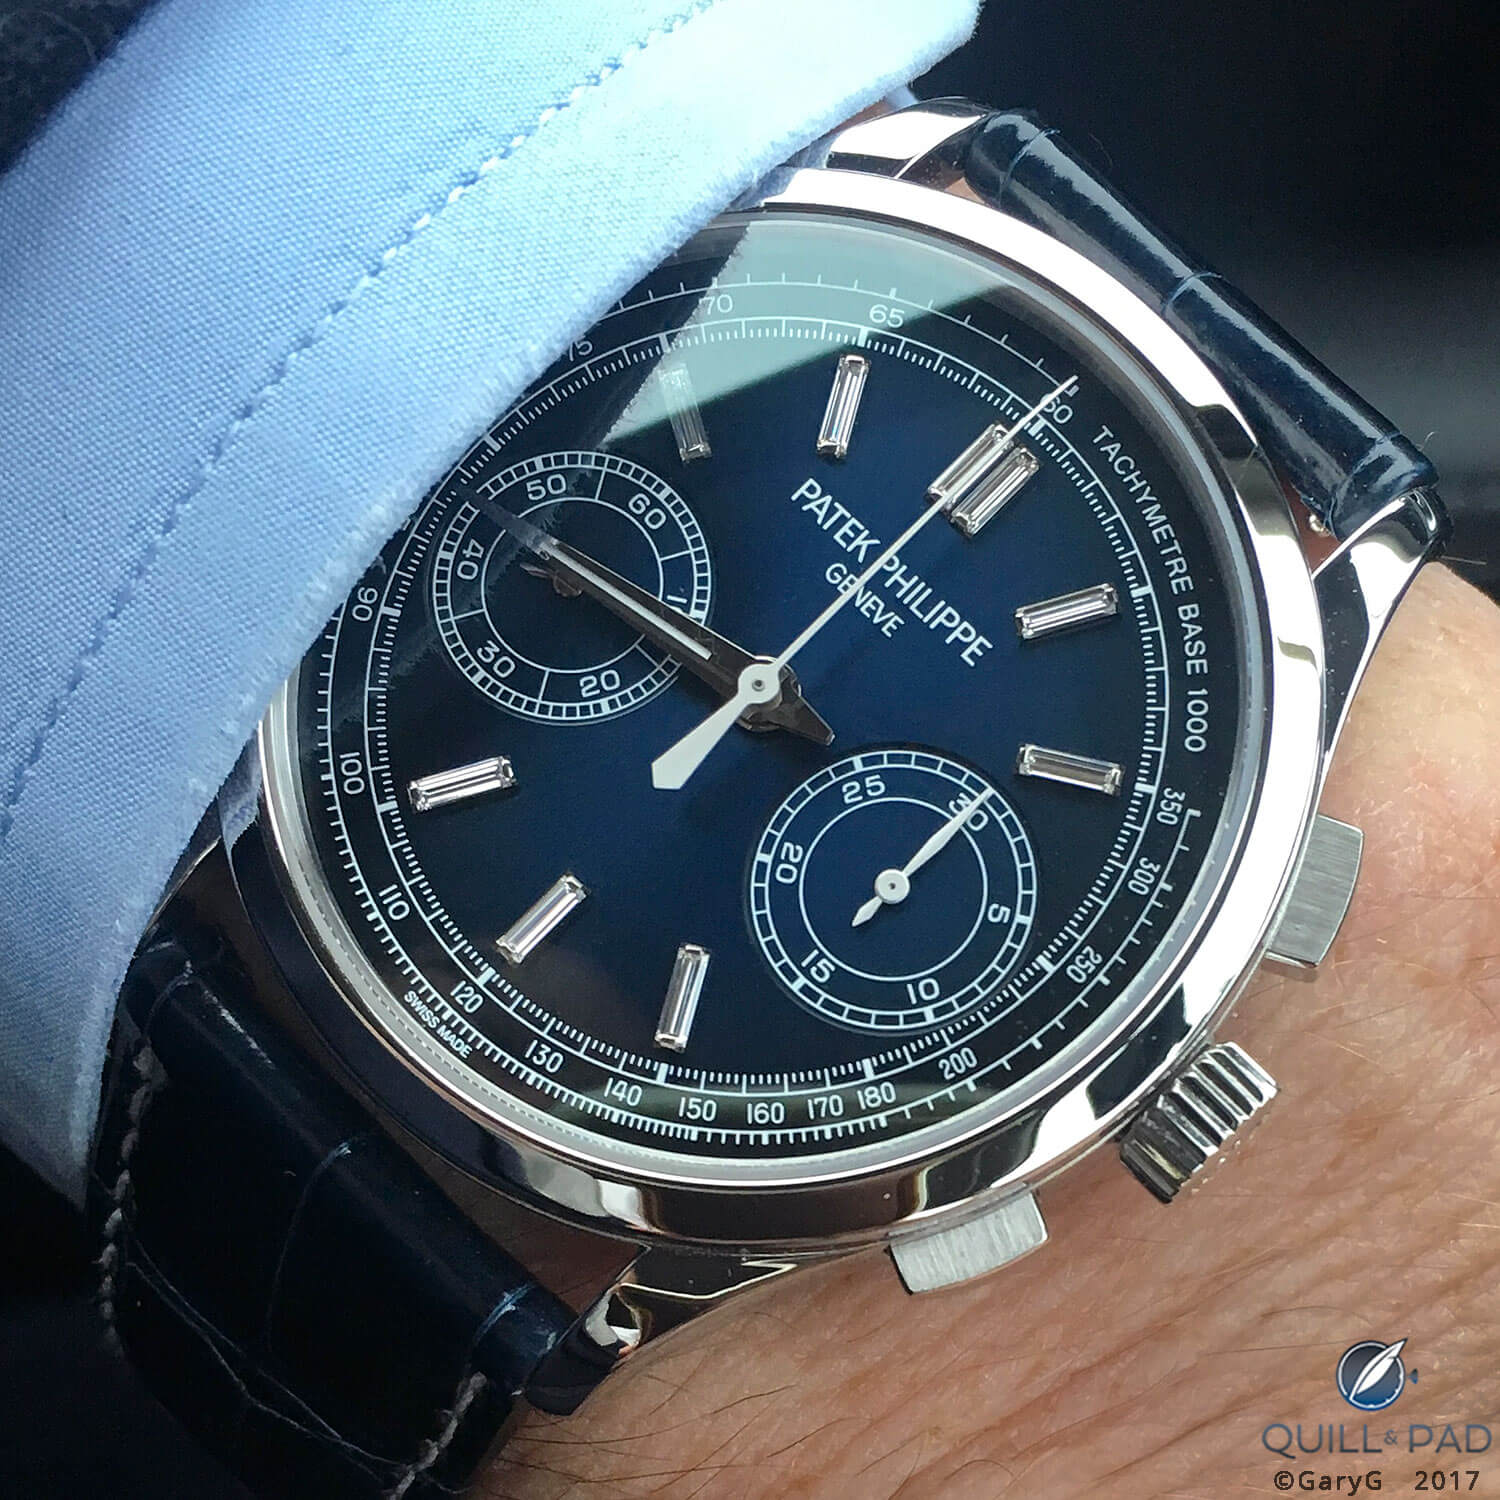 On the wrist: Patek Philippe Reference 5170P